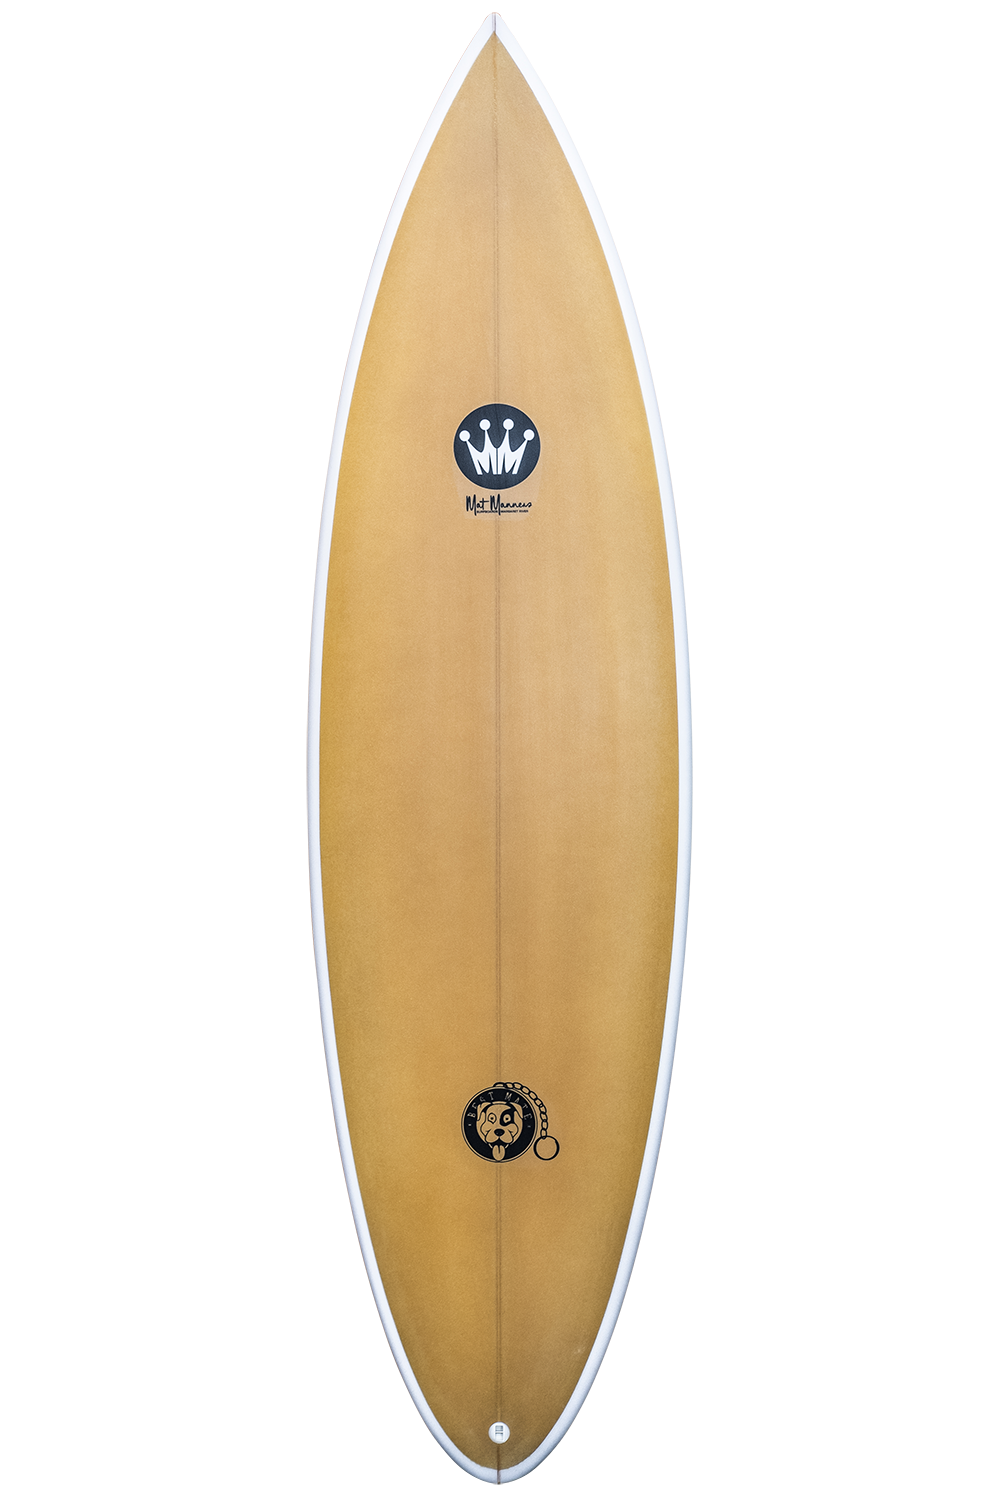   Shape : Best Mate   Length:  6’6”   Width:  19 7/8”   Thickness:  2 3/4”   Volume:  38L   Fins:  Thruster FCS II   Tail Shape:  Pin 